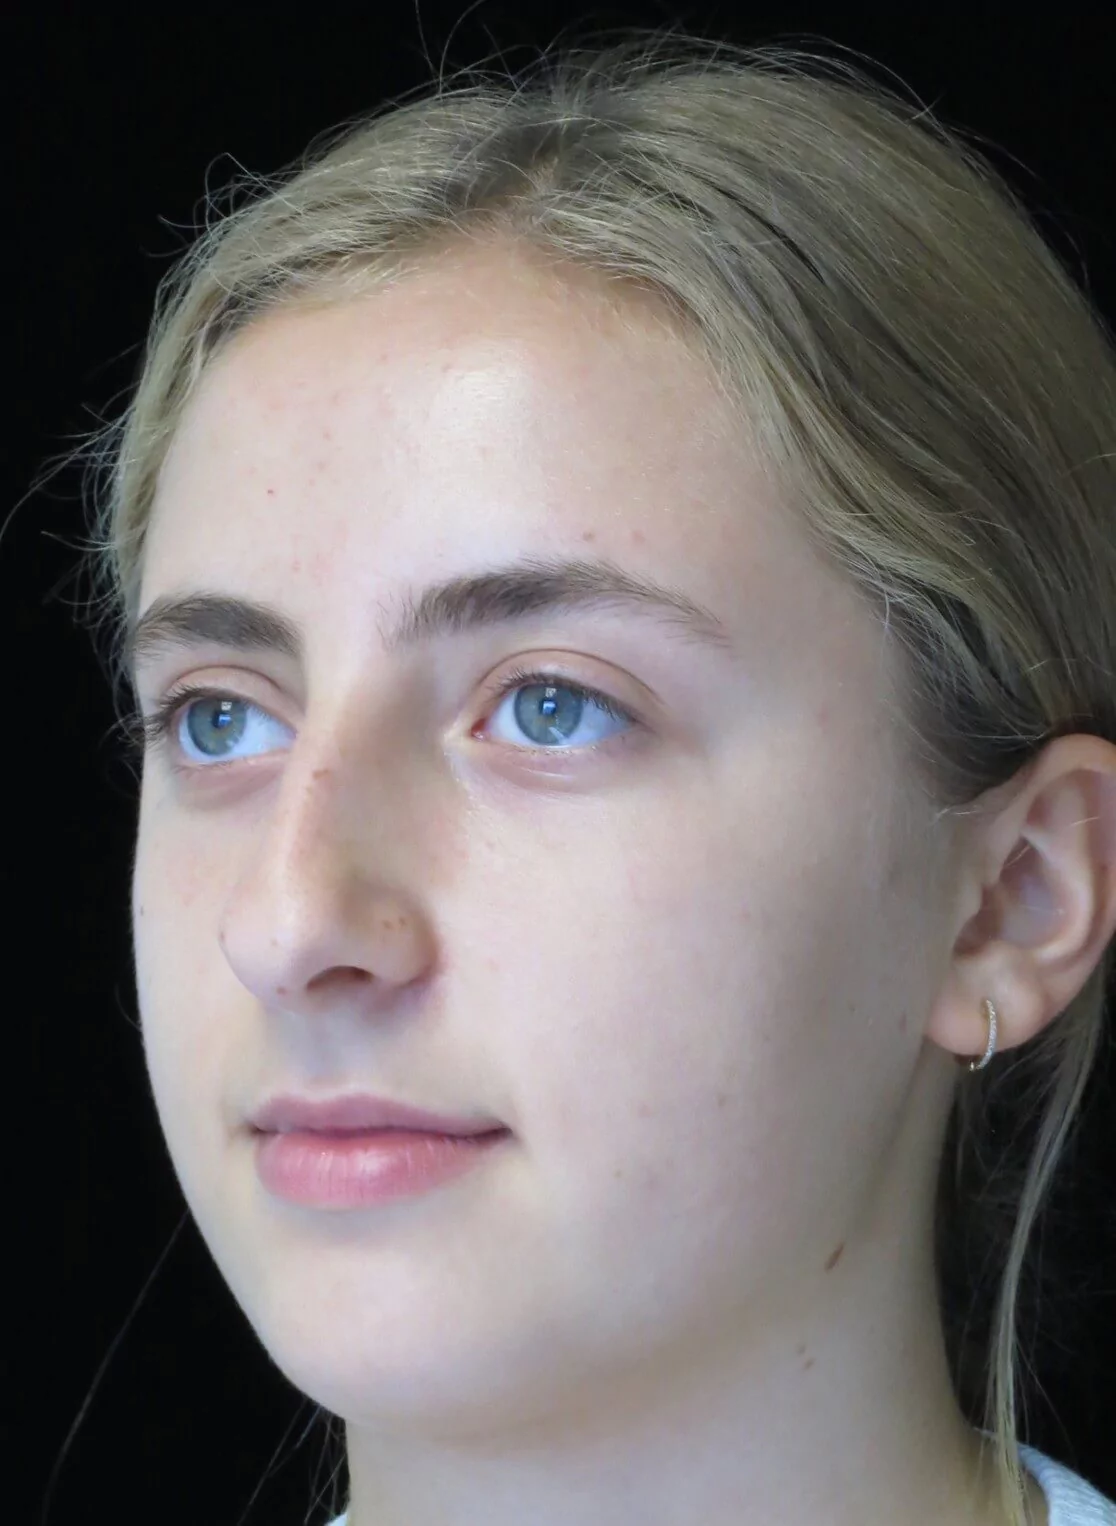 before and after photo on a right profile view of a non-smiling teenage female patient who underwent scarless rhinoplasty